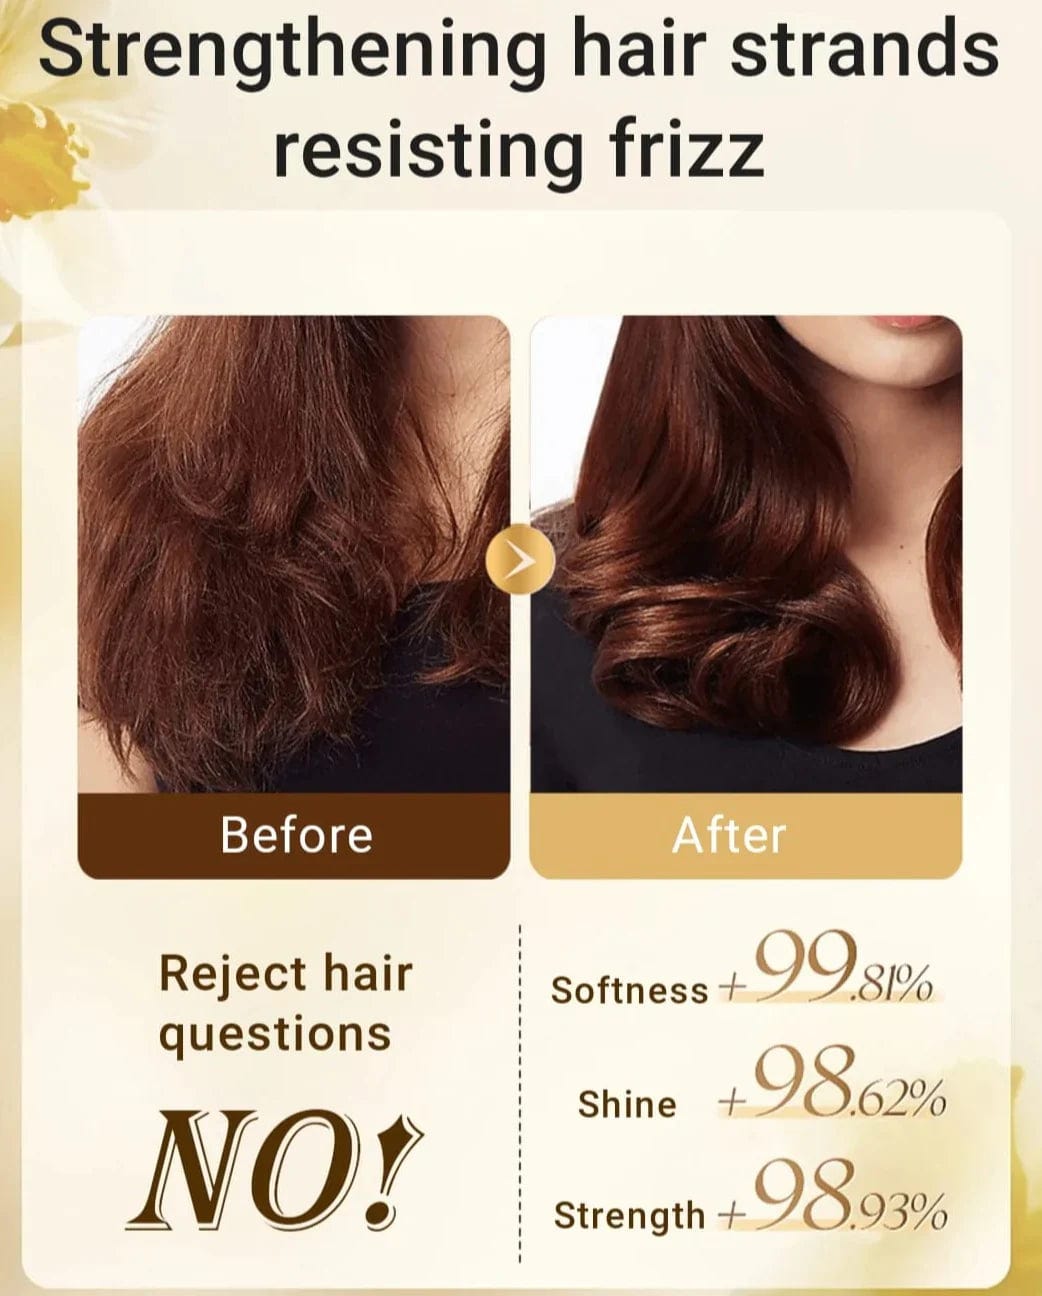 Perfumed Hair Oil Spray Repair Dry & Frizzy Hair (Buy 1 Get 1 Free LIMITED OFFER) Reliever ™